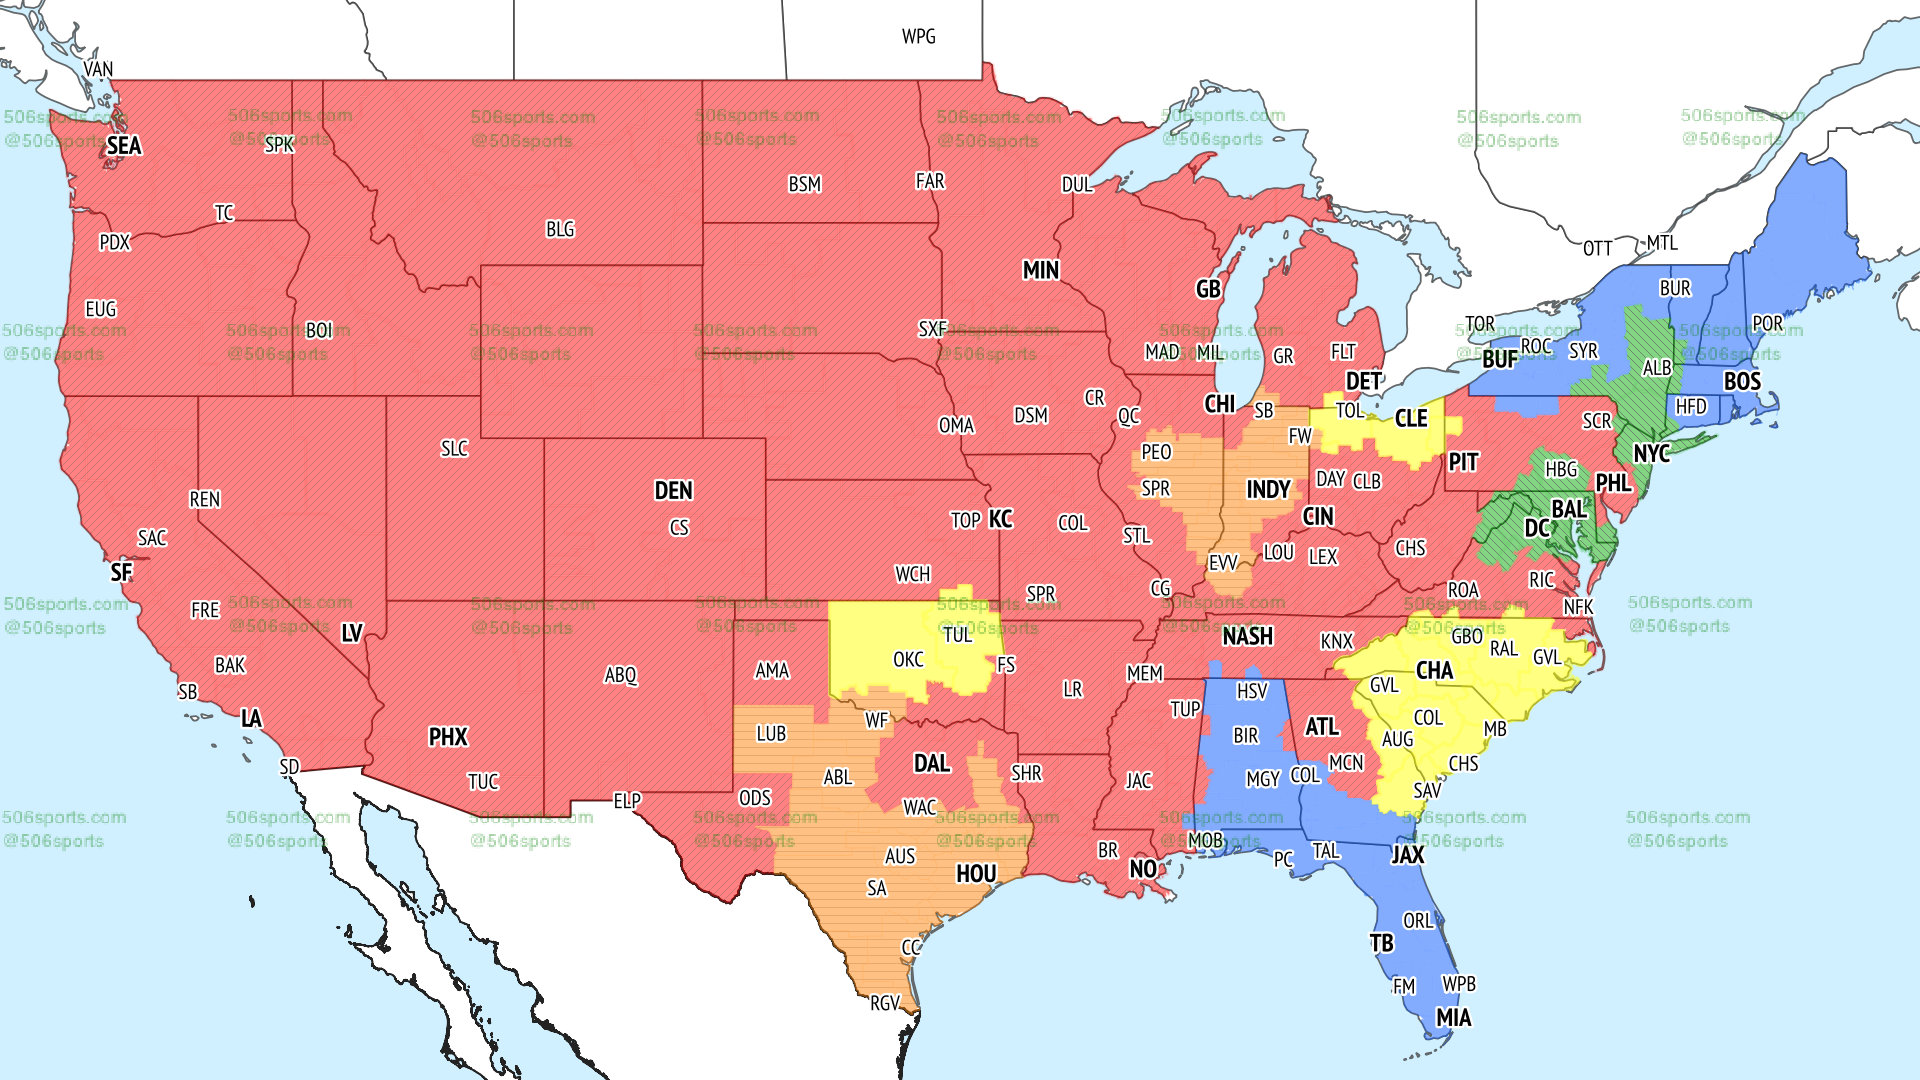 NFL coverage map of early CBS games in Week 1